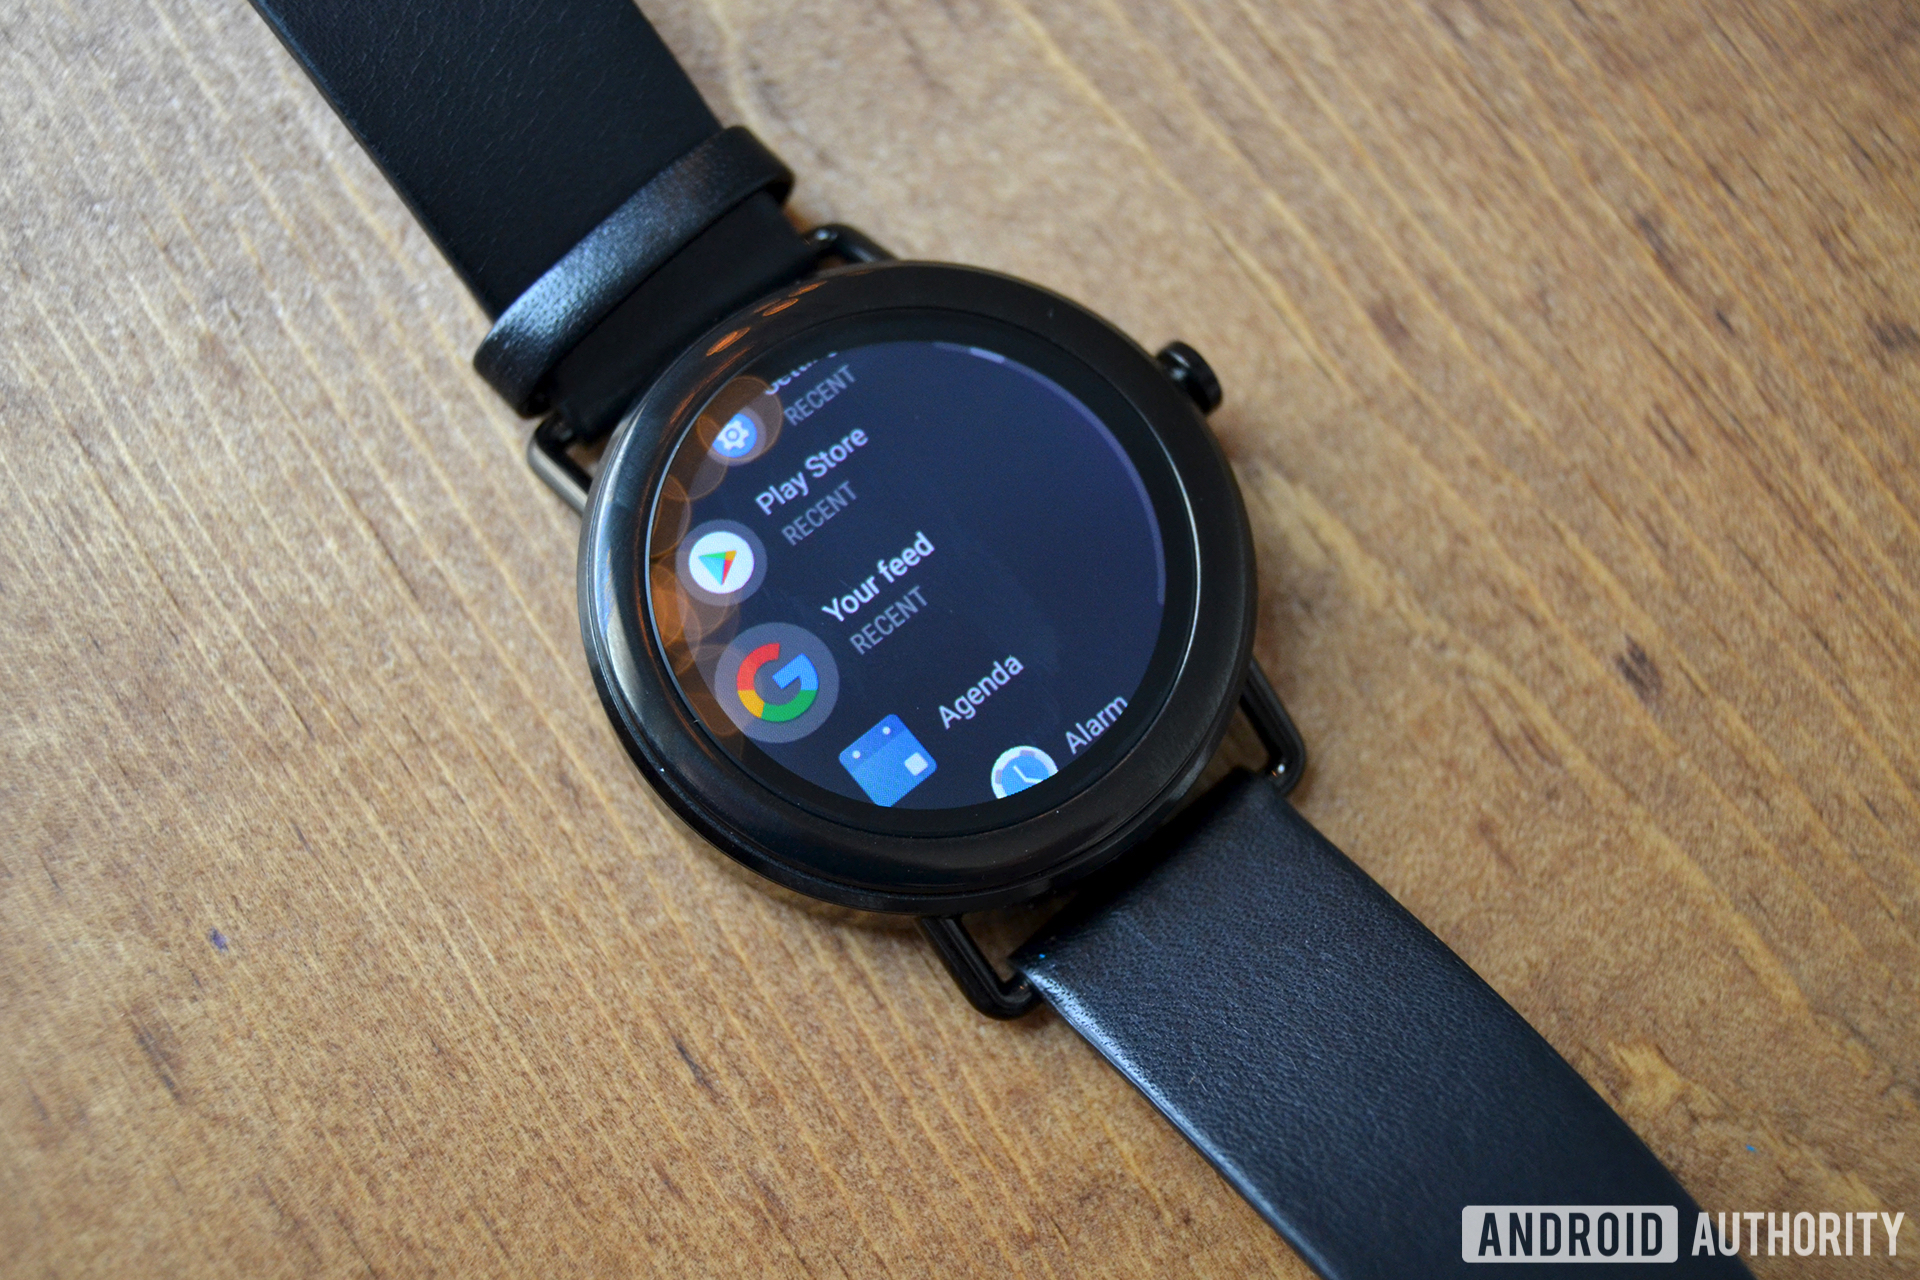 angst bibliotheek Interpretatie These are the Android Wear smartwatches getting the Wear OS update - Android  Authority